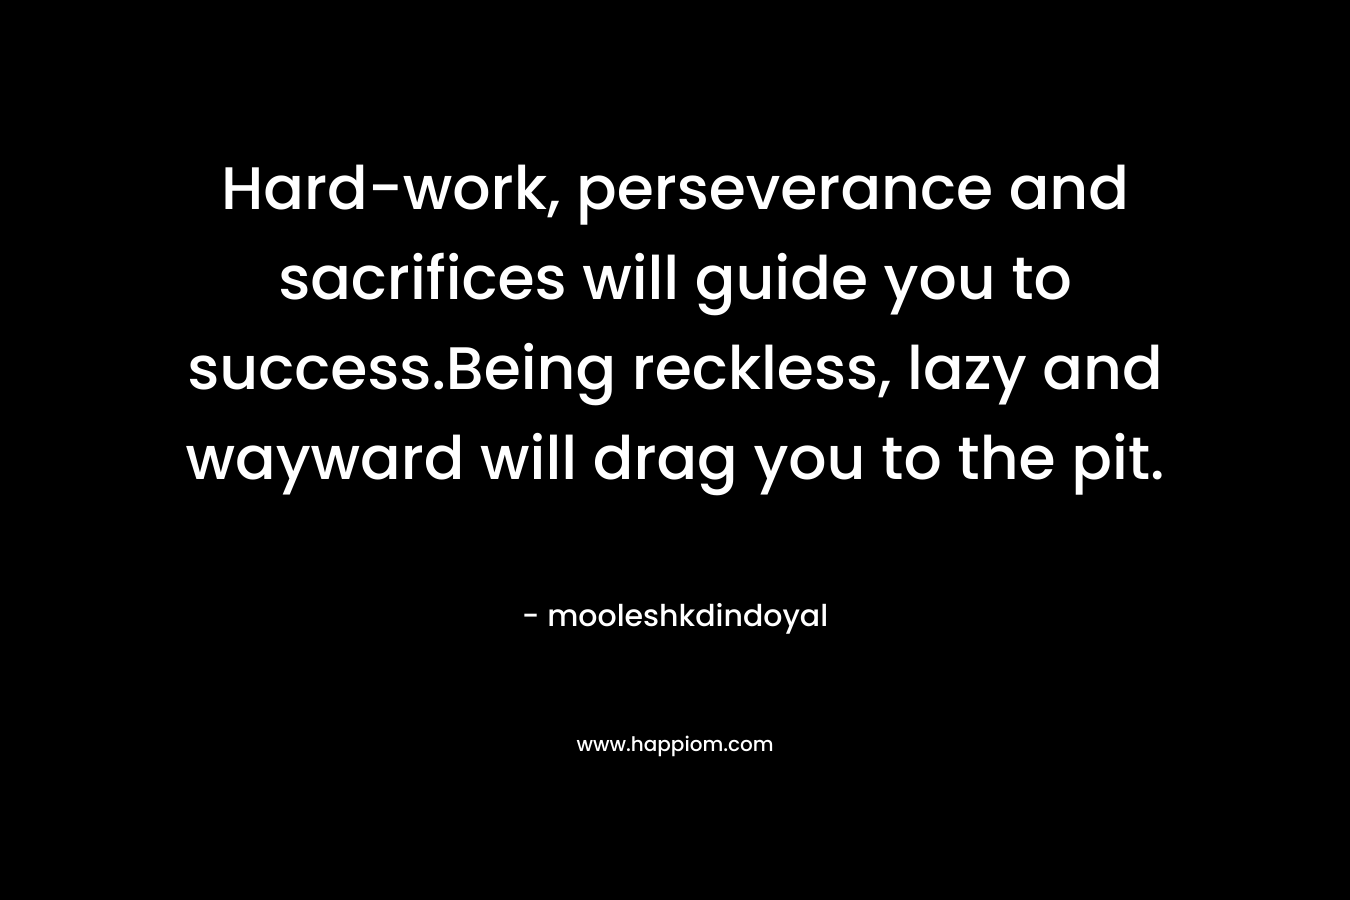 Hard-work, perseverance and sacrifices will guide you to success.Being reckless, lazy and wayward will drag you to the pit.